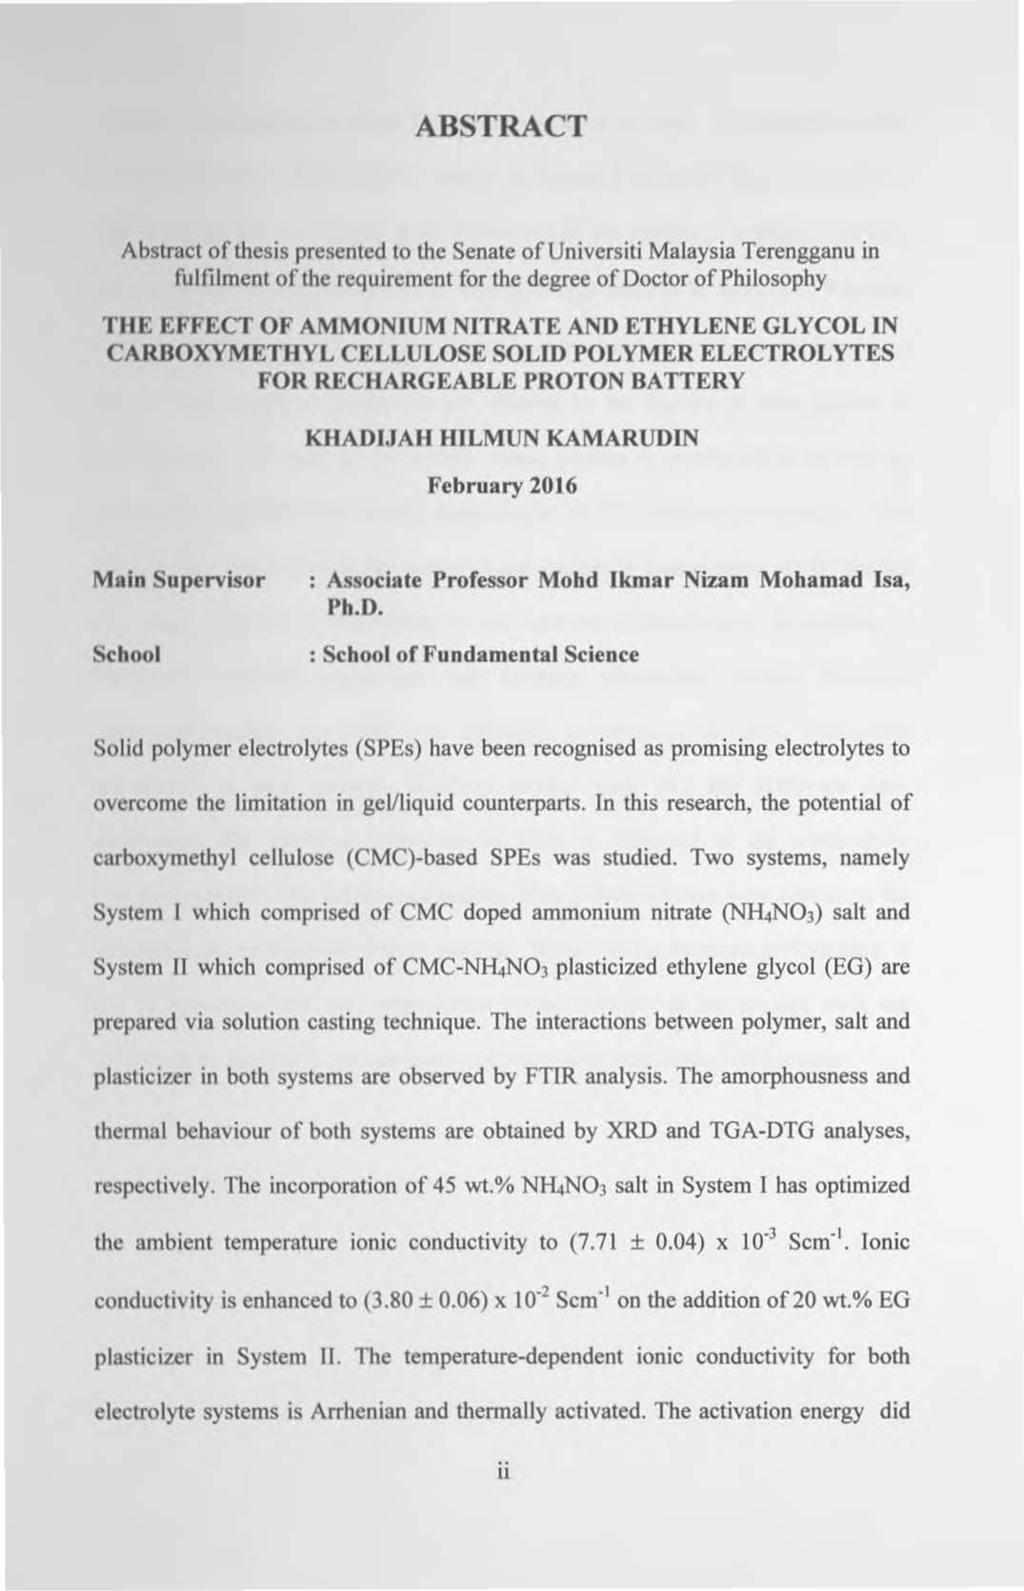 ABSTRACT Abstract of thesis presented to the Senate of Universiti Malaysia Terengganu in fulfilment of the requirement for the degree of Doctor of Philosophy THE EFFECT OF AMMONIUM NITRATE AND